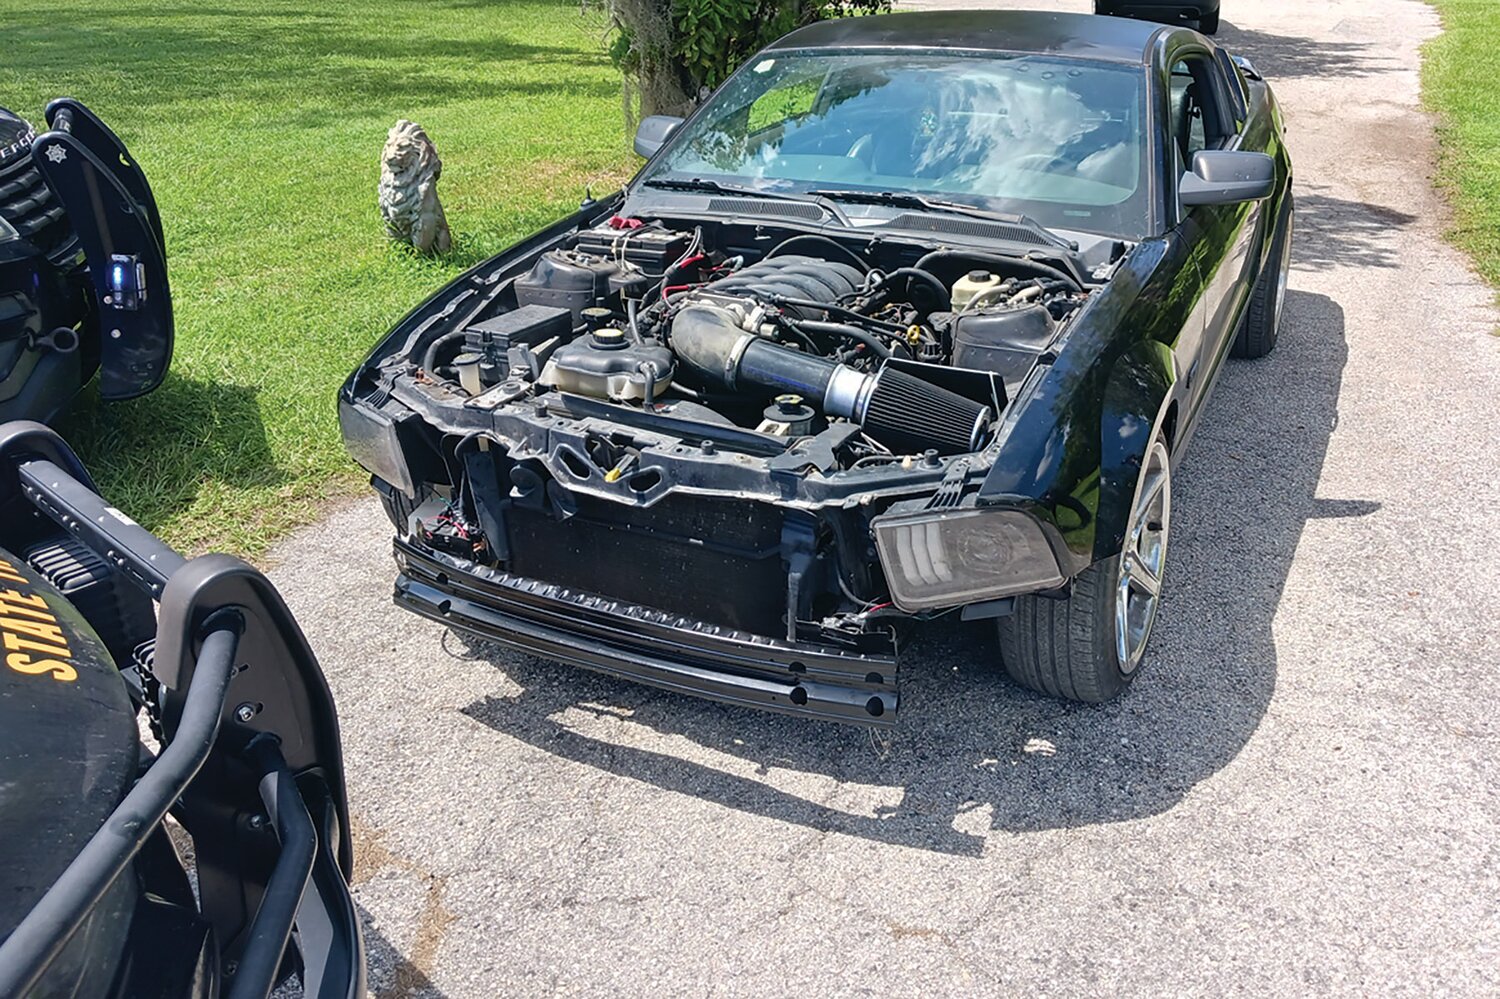 The hood was removed to alter the appearance of the vehicle.